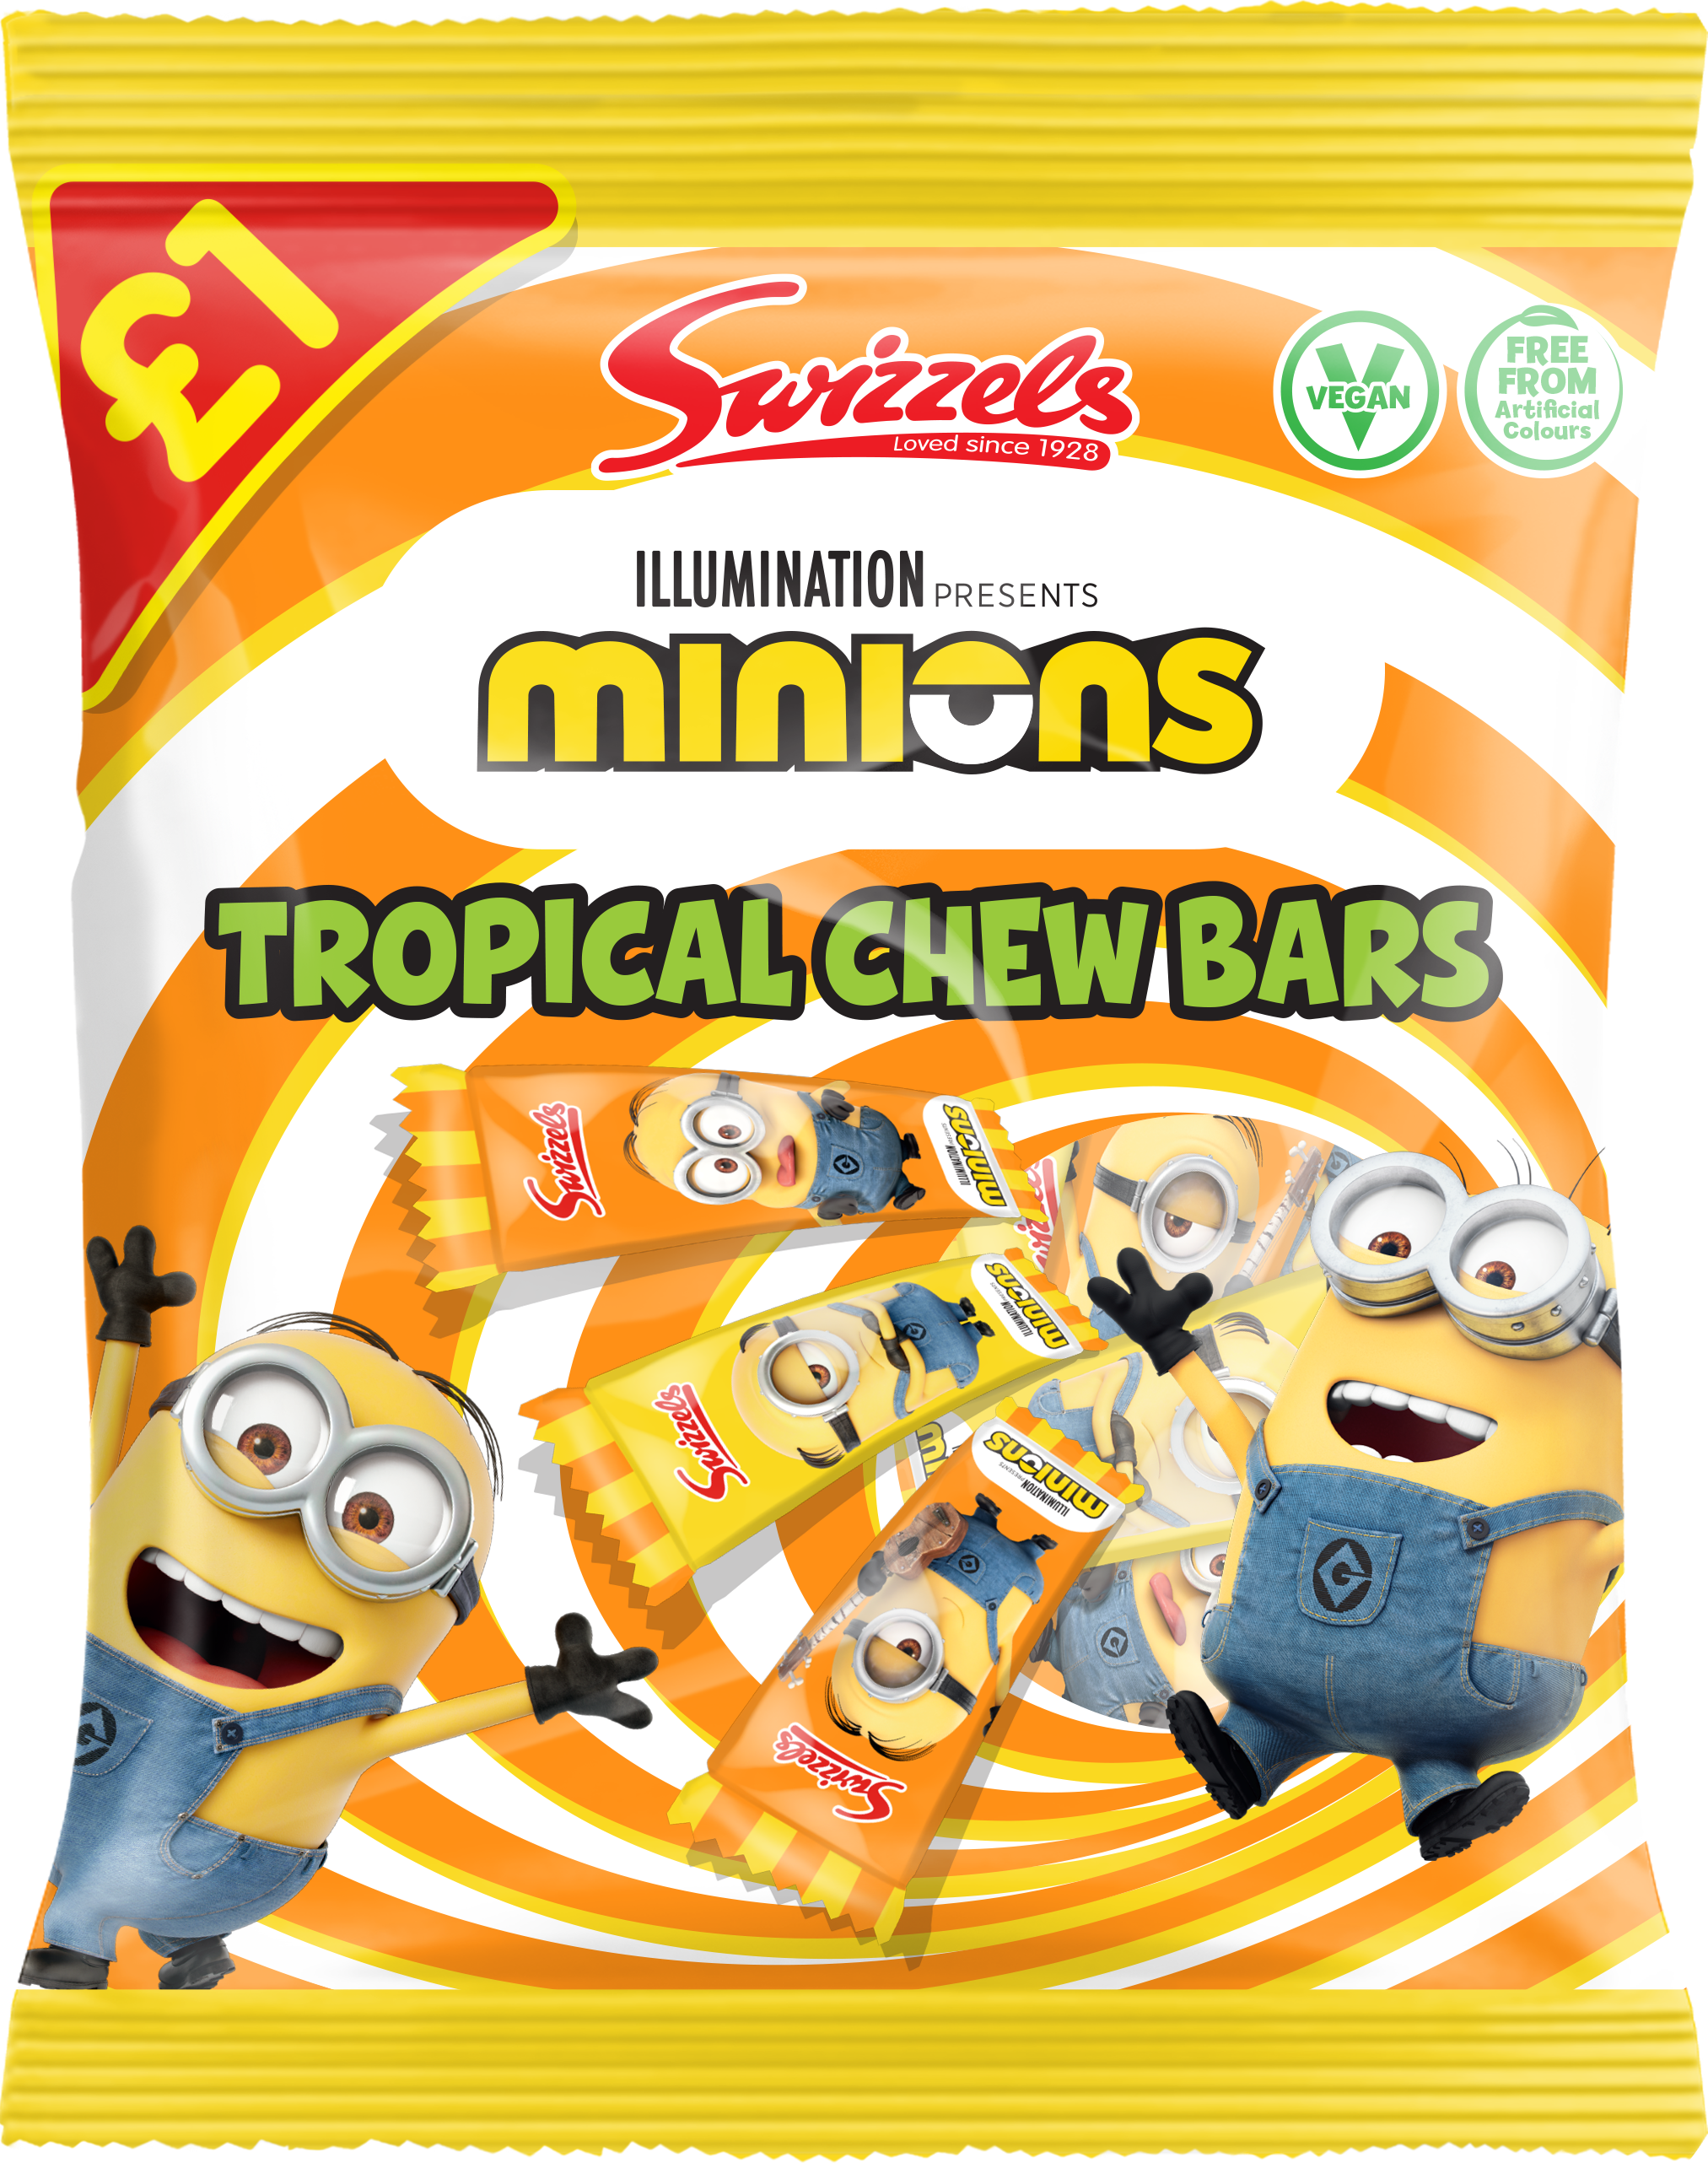 Swizzels unleashes Minions, inspired by movie ‘Minions: The Rise of Gru’